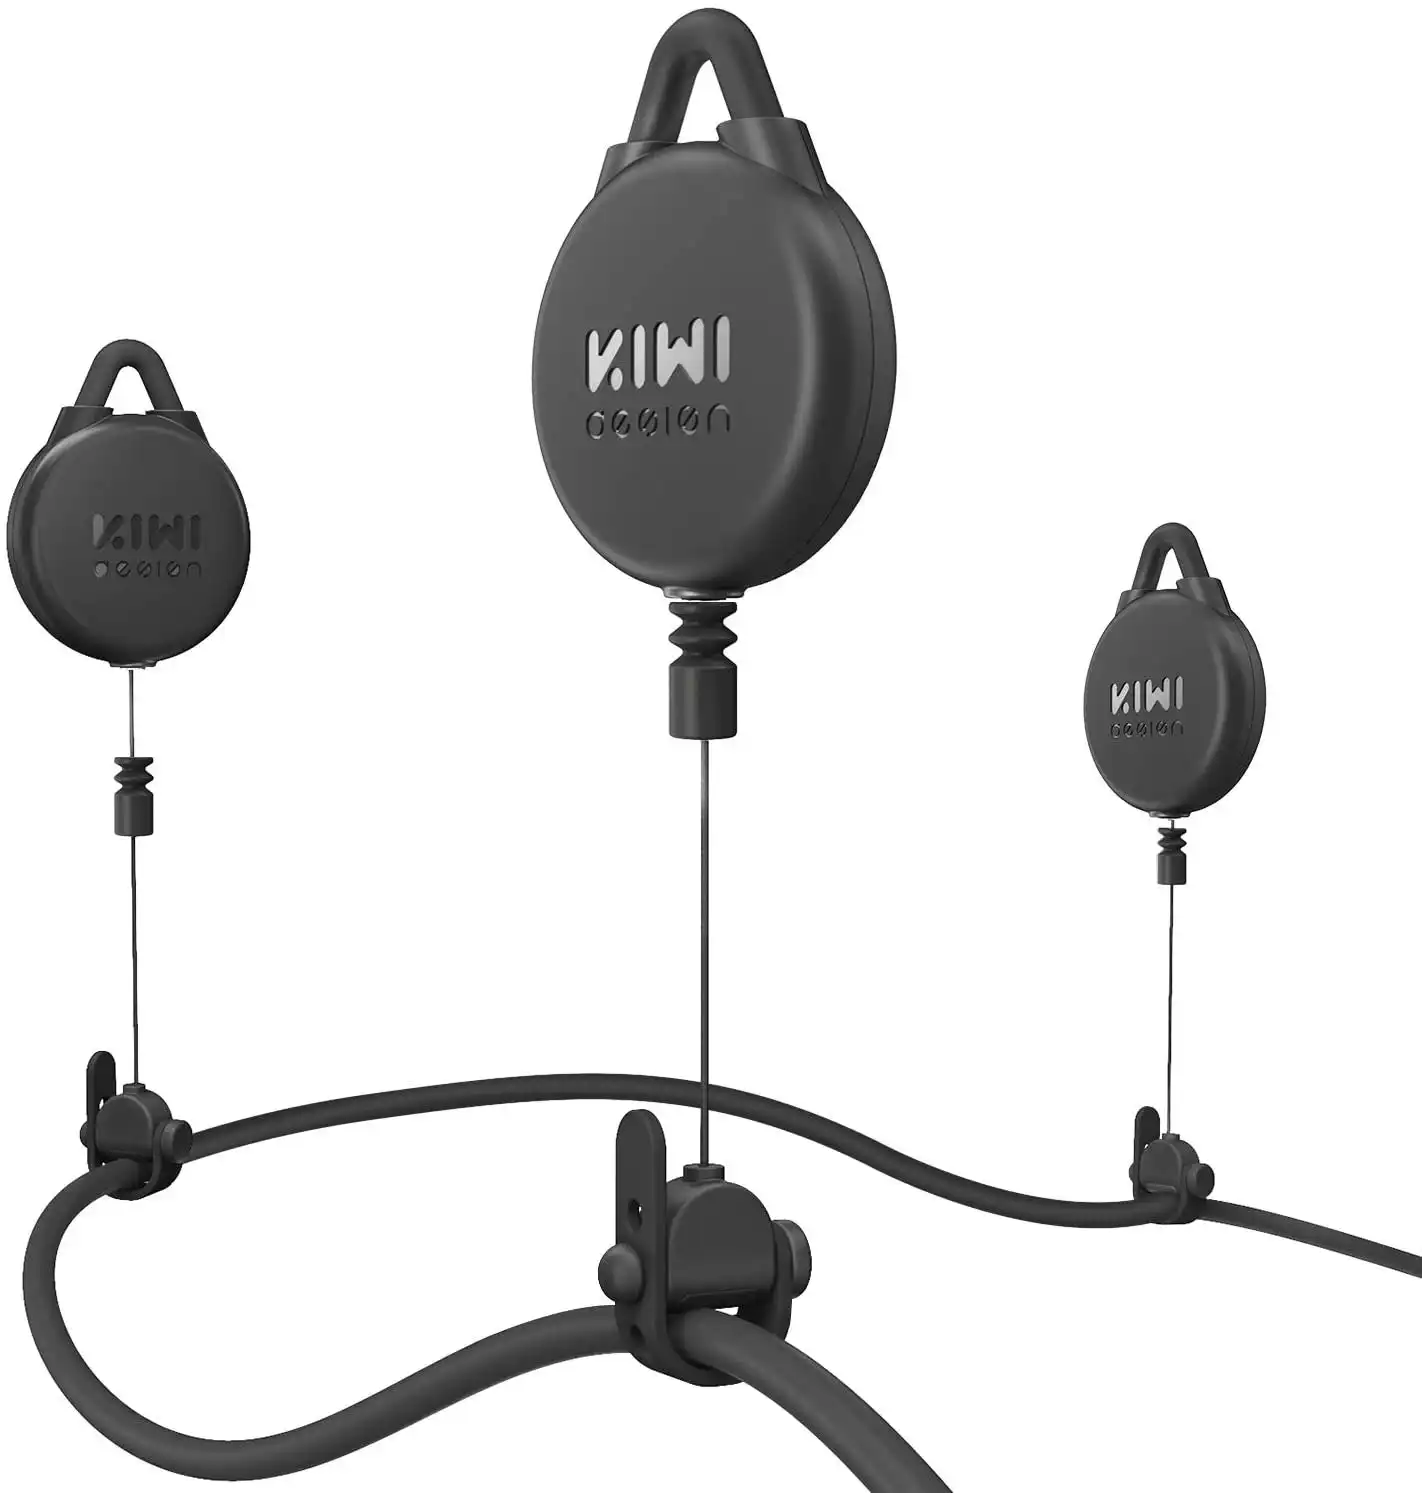 [Pro Version] KIWI design VR Cable Management, 6 Packs Retractable Ceiling Pulley System for HTC Vive/Vive Pro/Oculus Rift/Rift S/Link Cable for Oculu